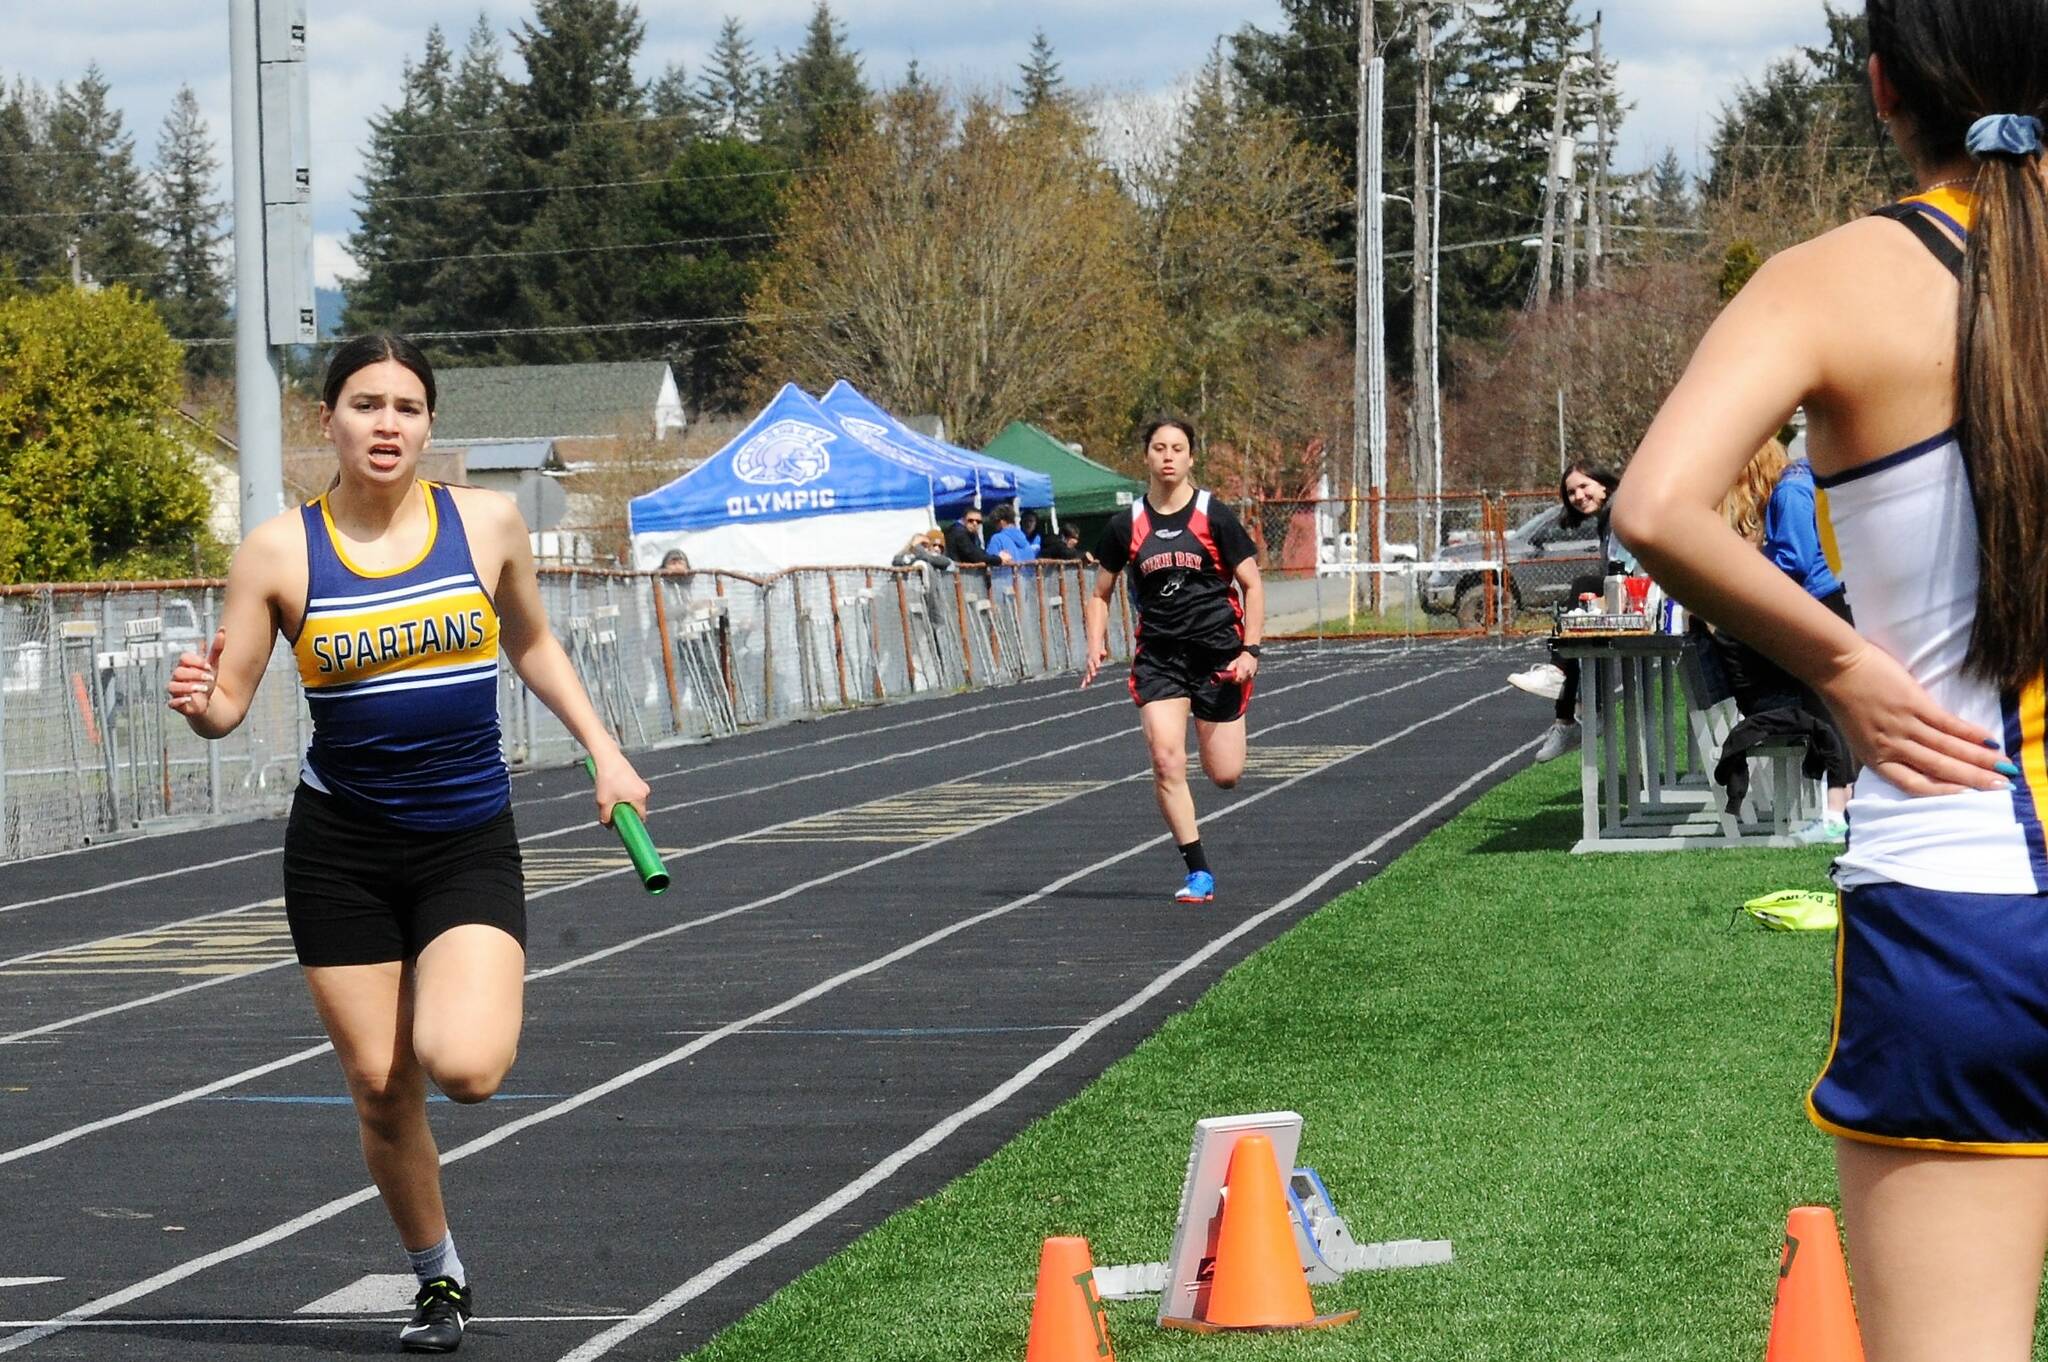 Spartan Candida Sandoval reaches the finish line in the 4 X 2 relay. Photo by Lonnie Archibald